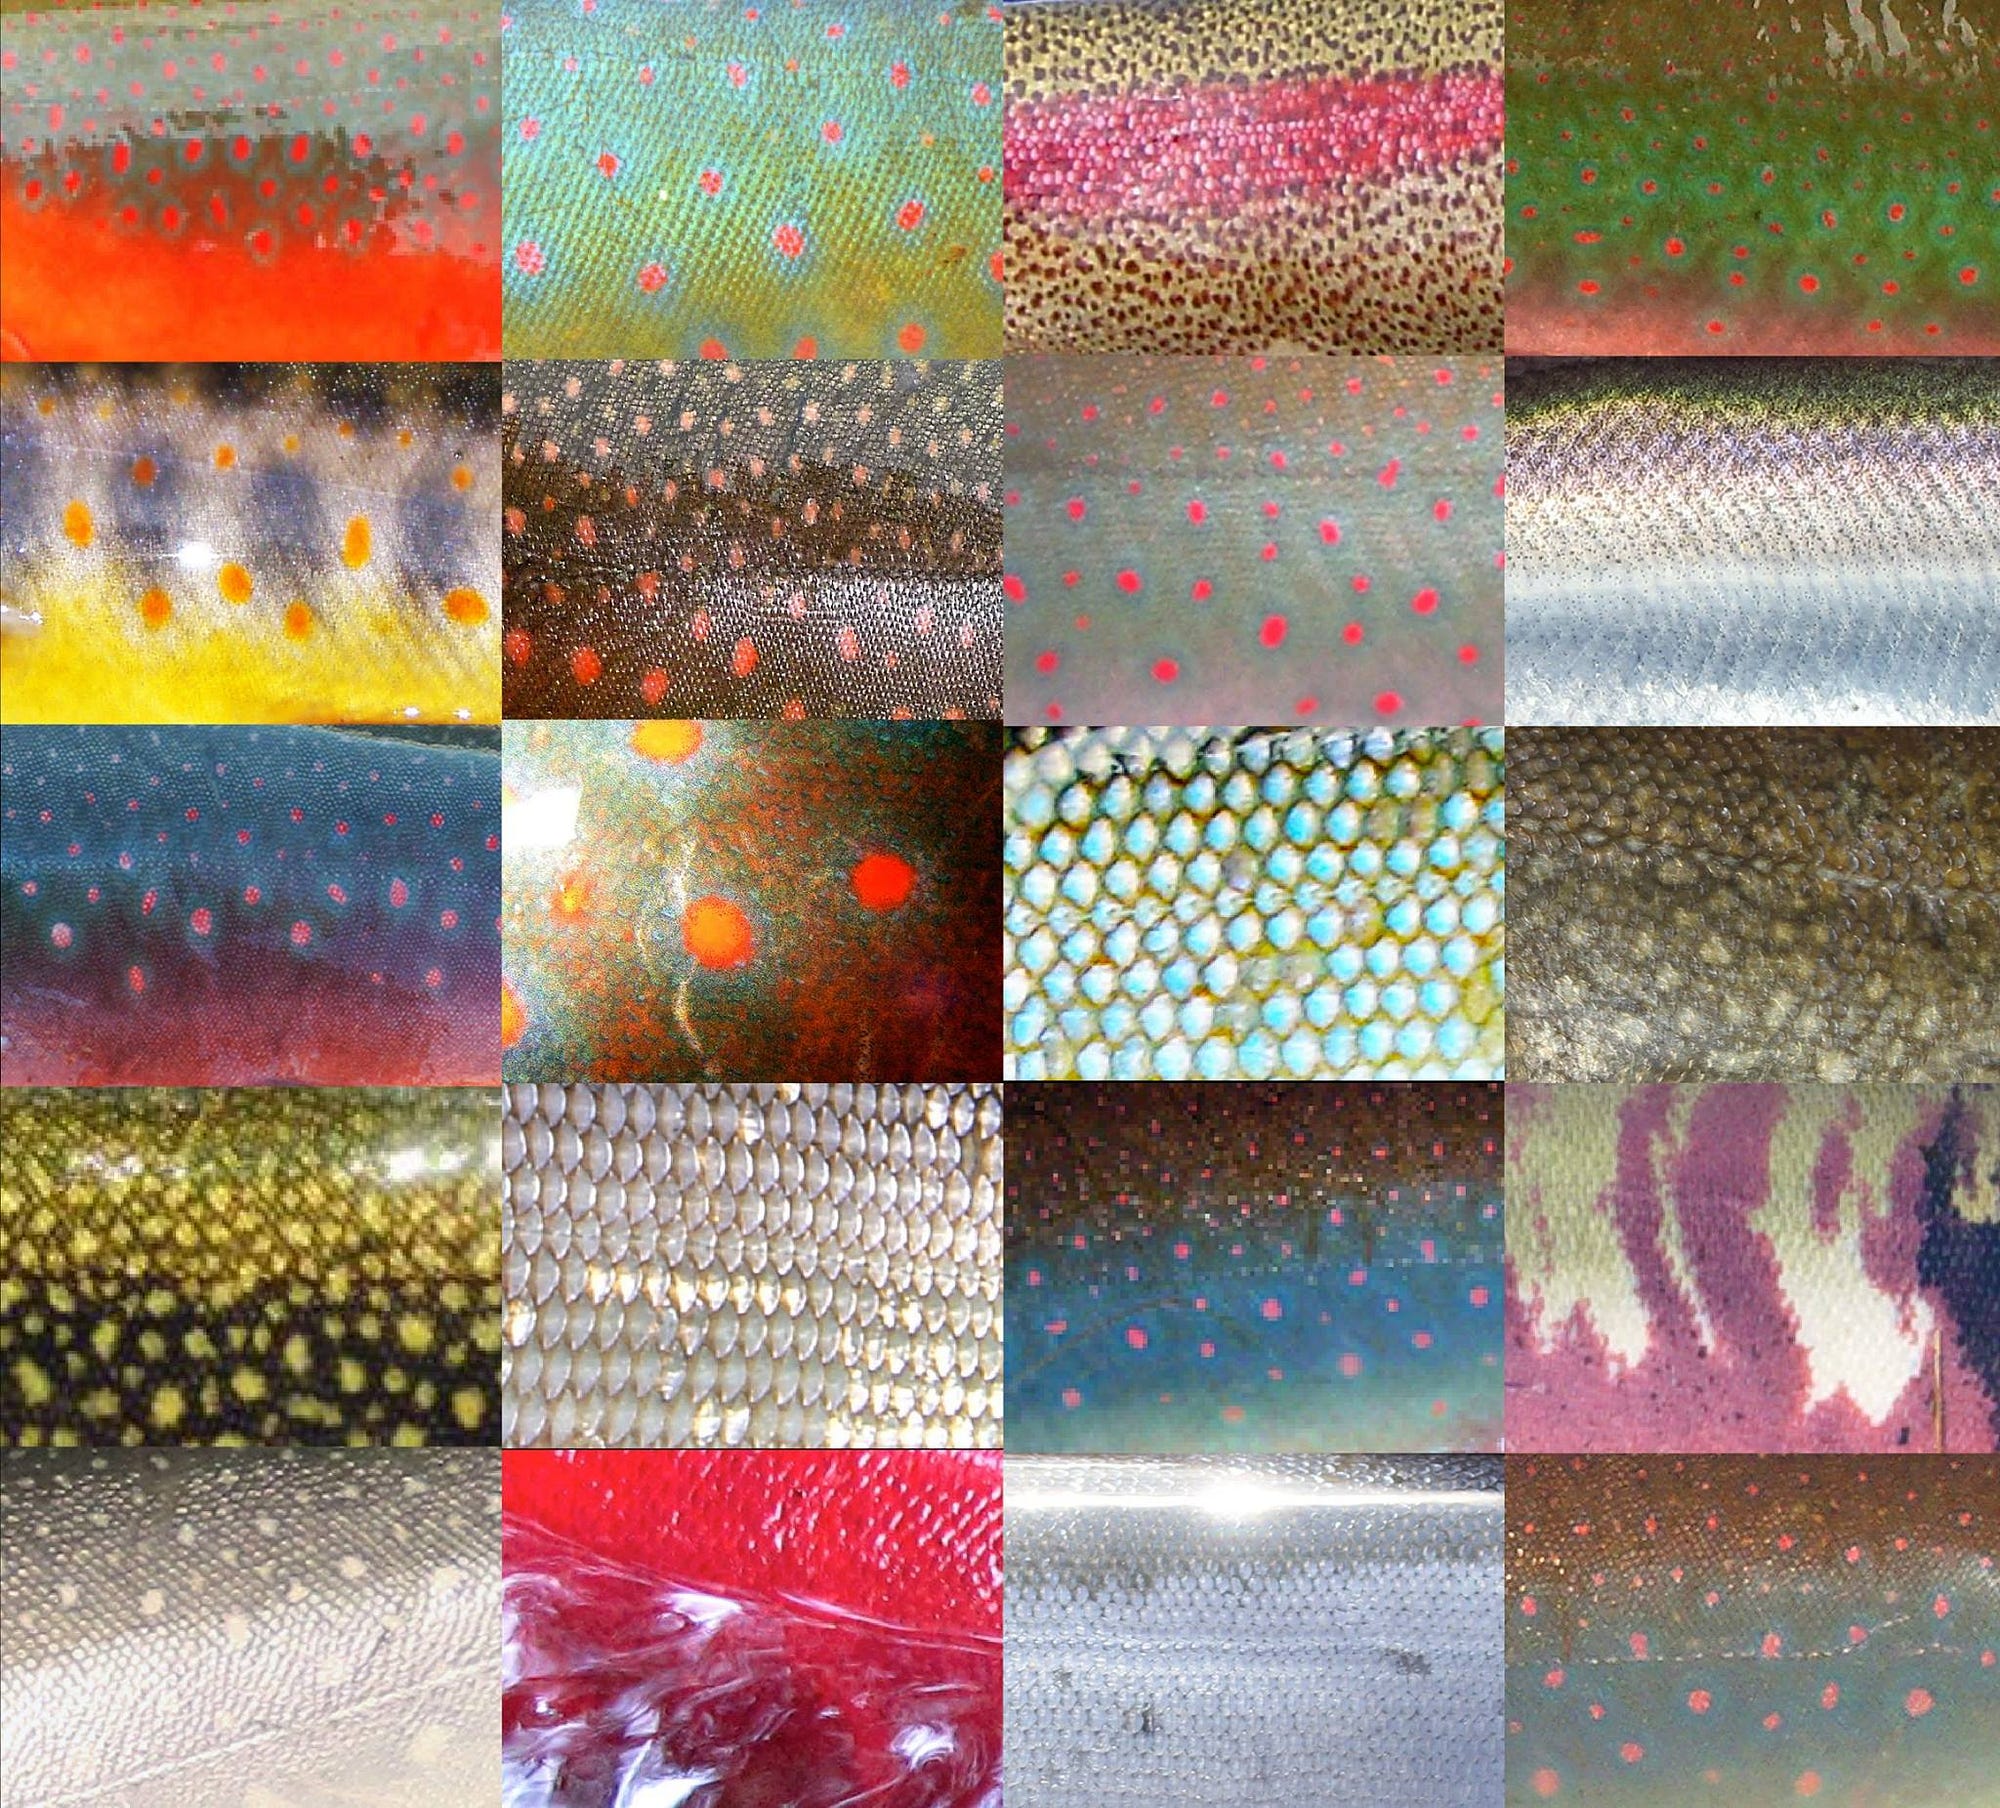 The Beauty of Fish Scales. Fish are absolutely beautiful. There…, by U.S.  Fish and Wildlife Service